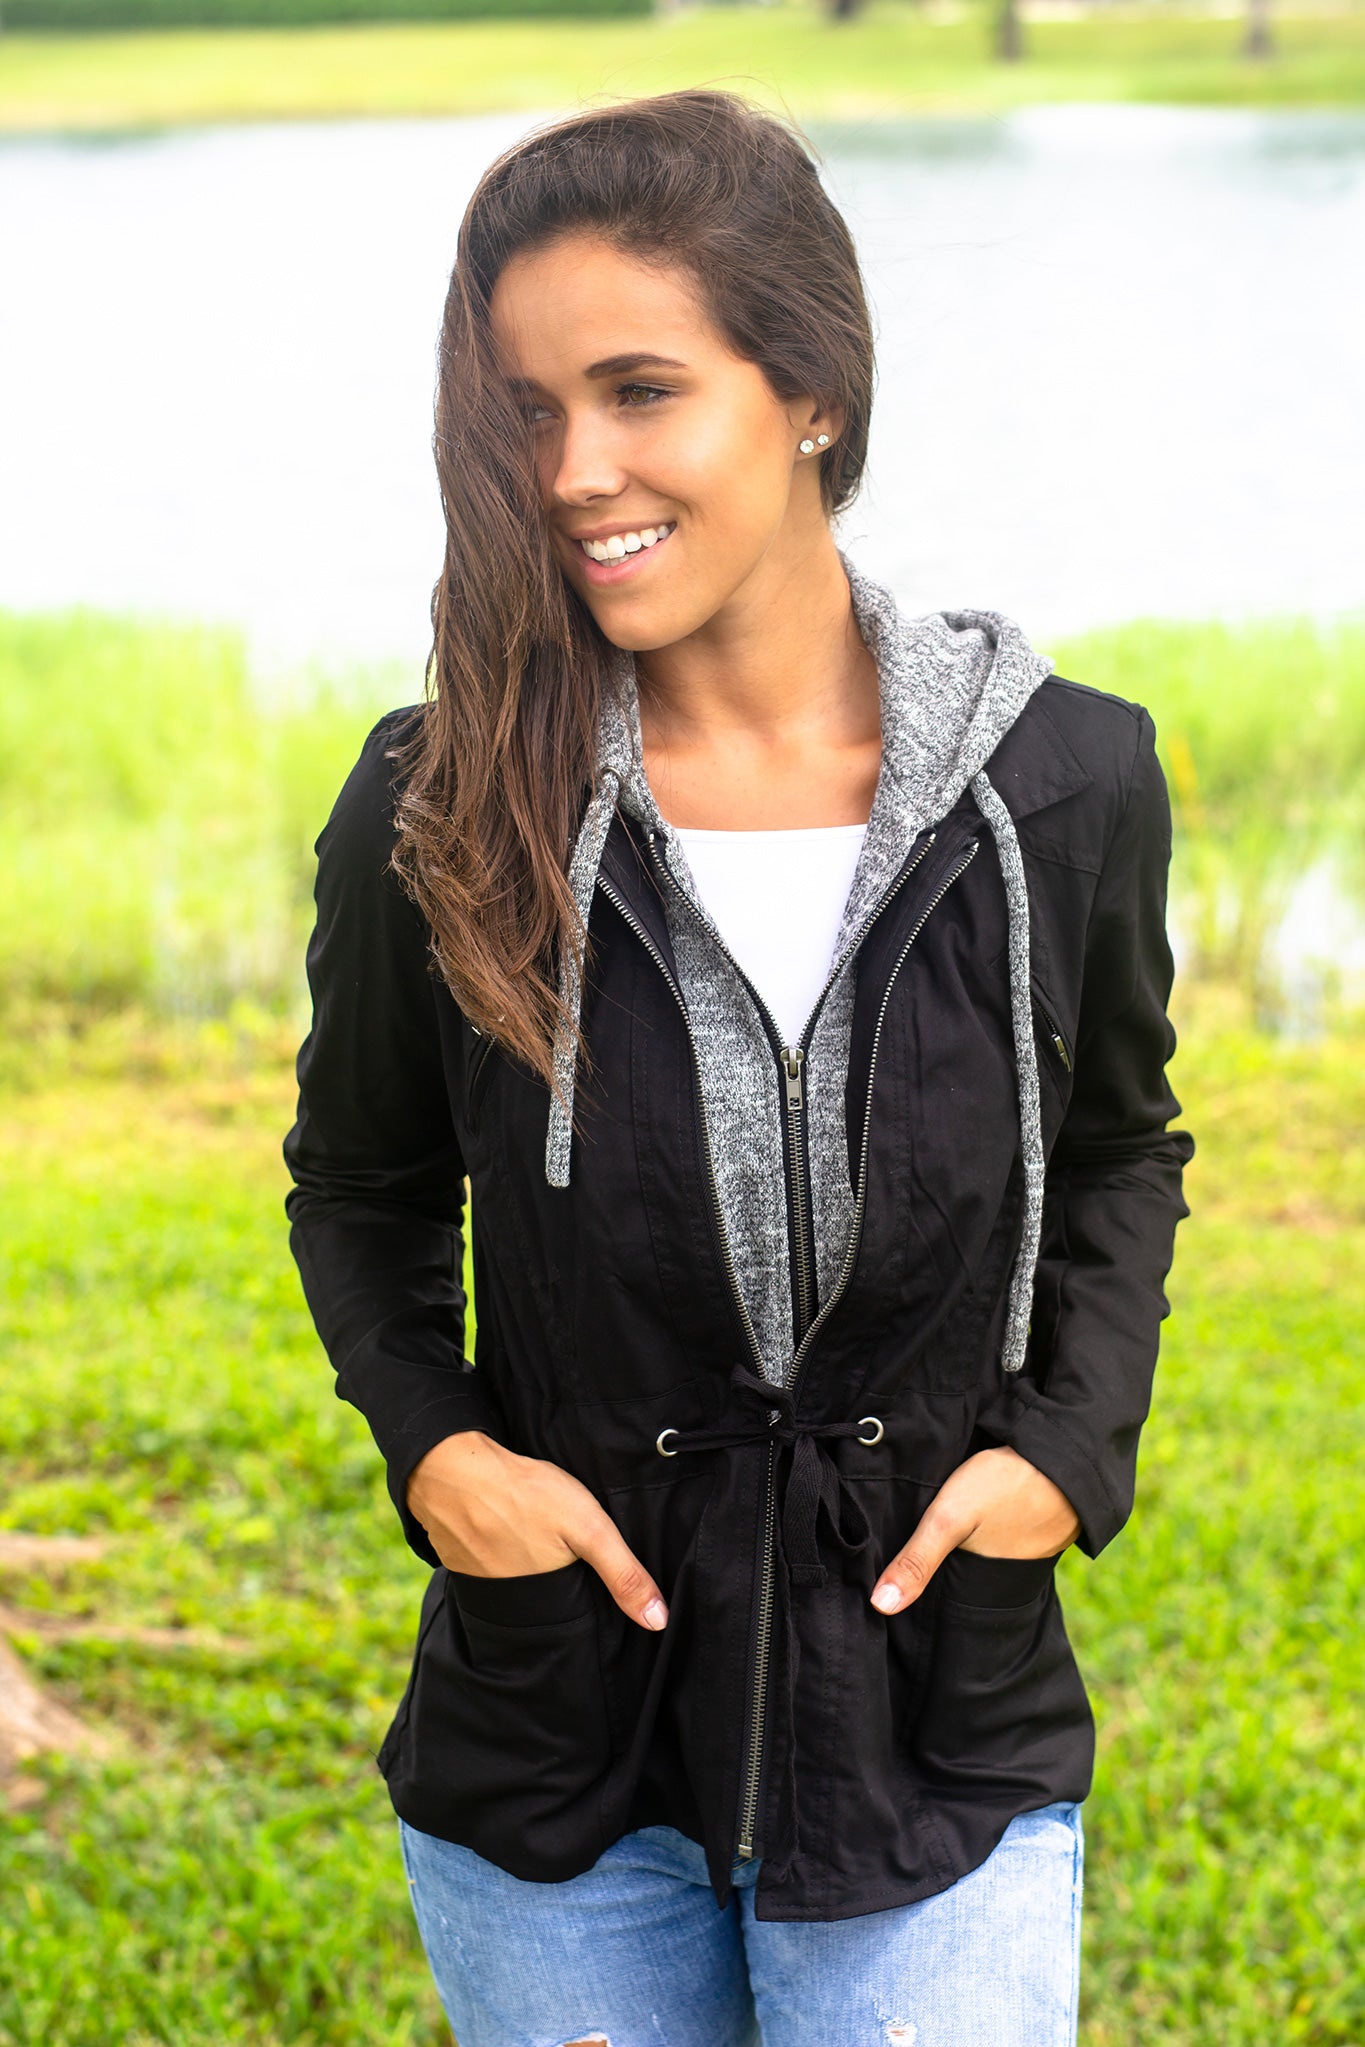 Black and Gray Hooded Jacket